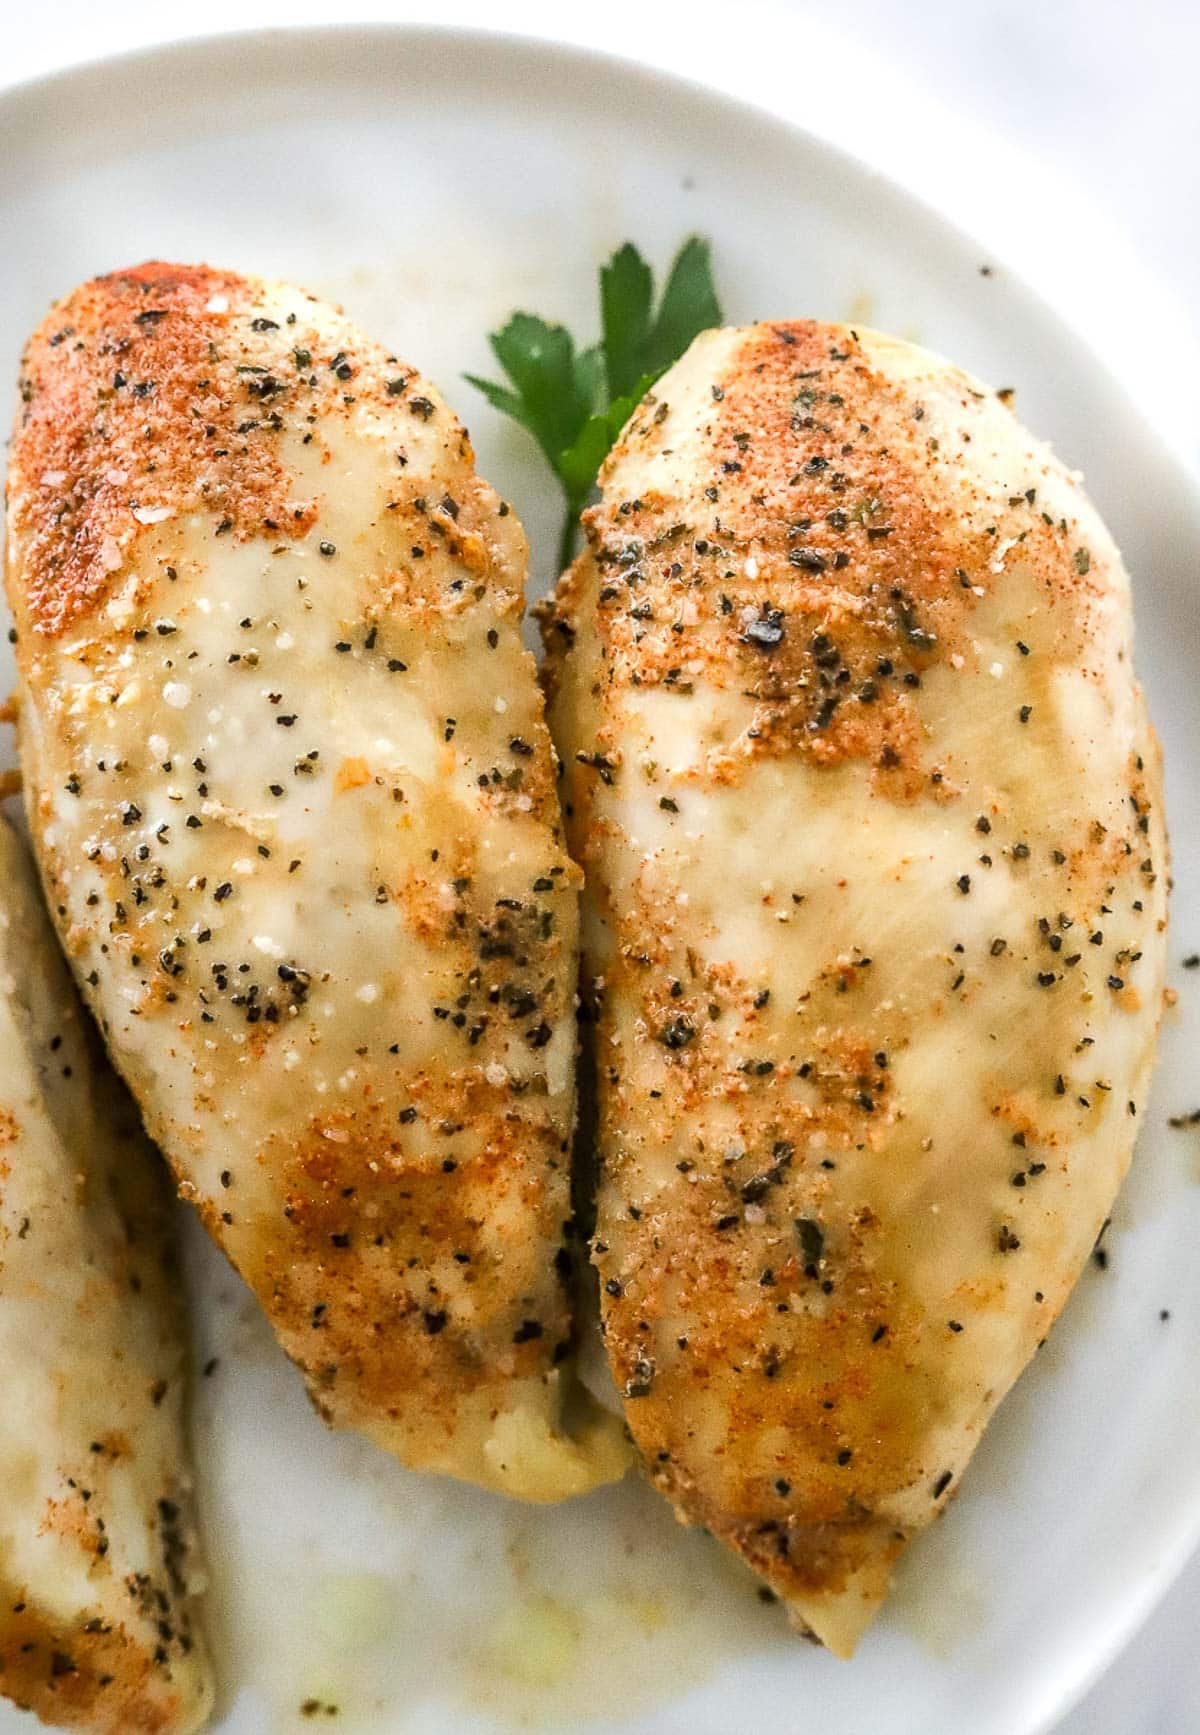 Two seasoned cooked chicken breasts in crockpot on a plate.